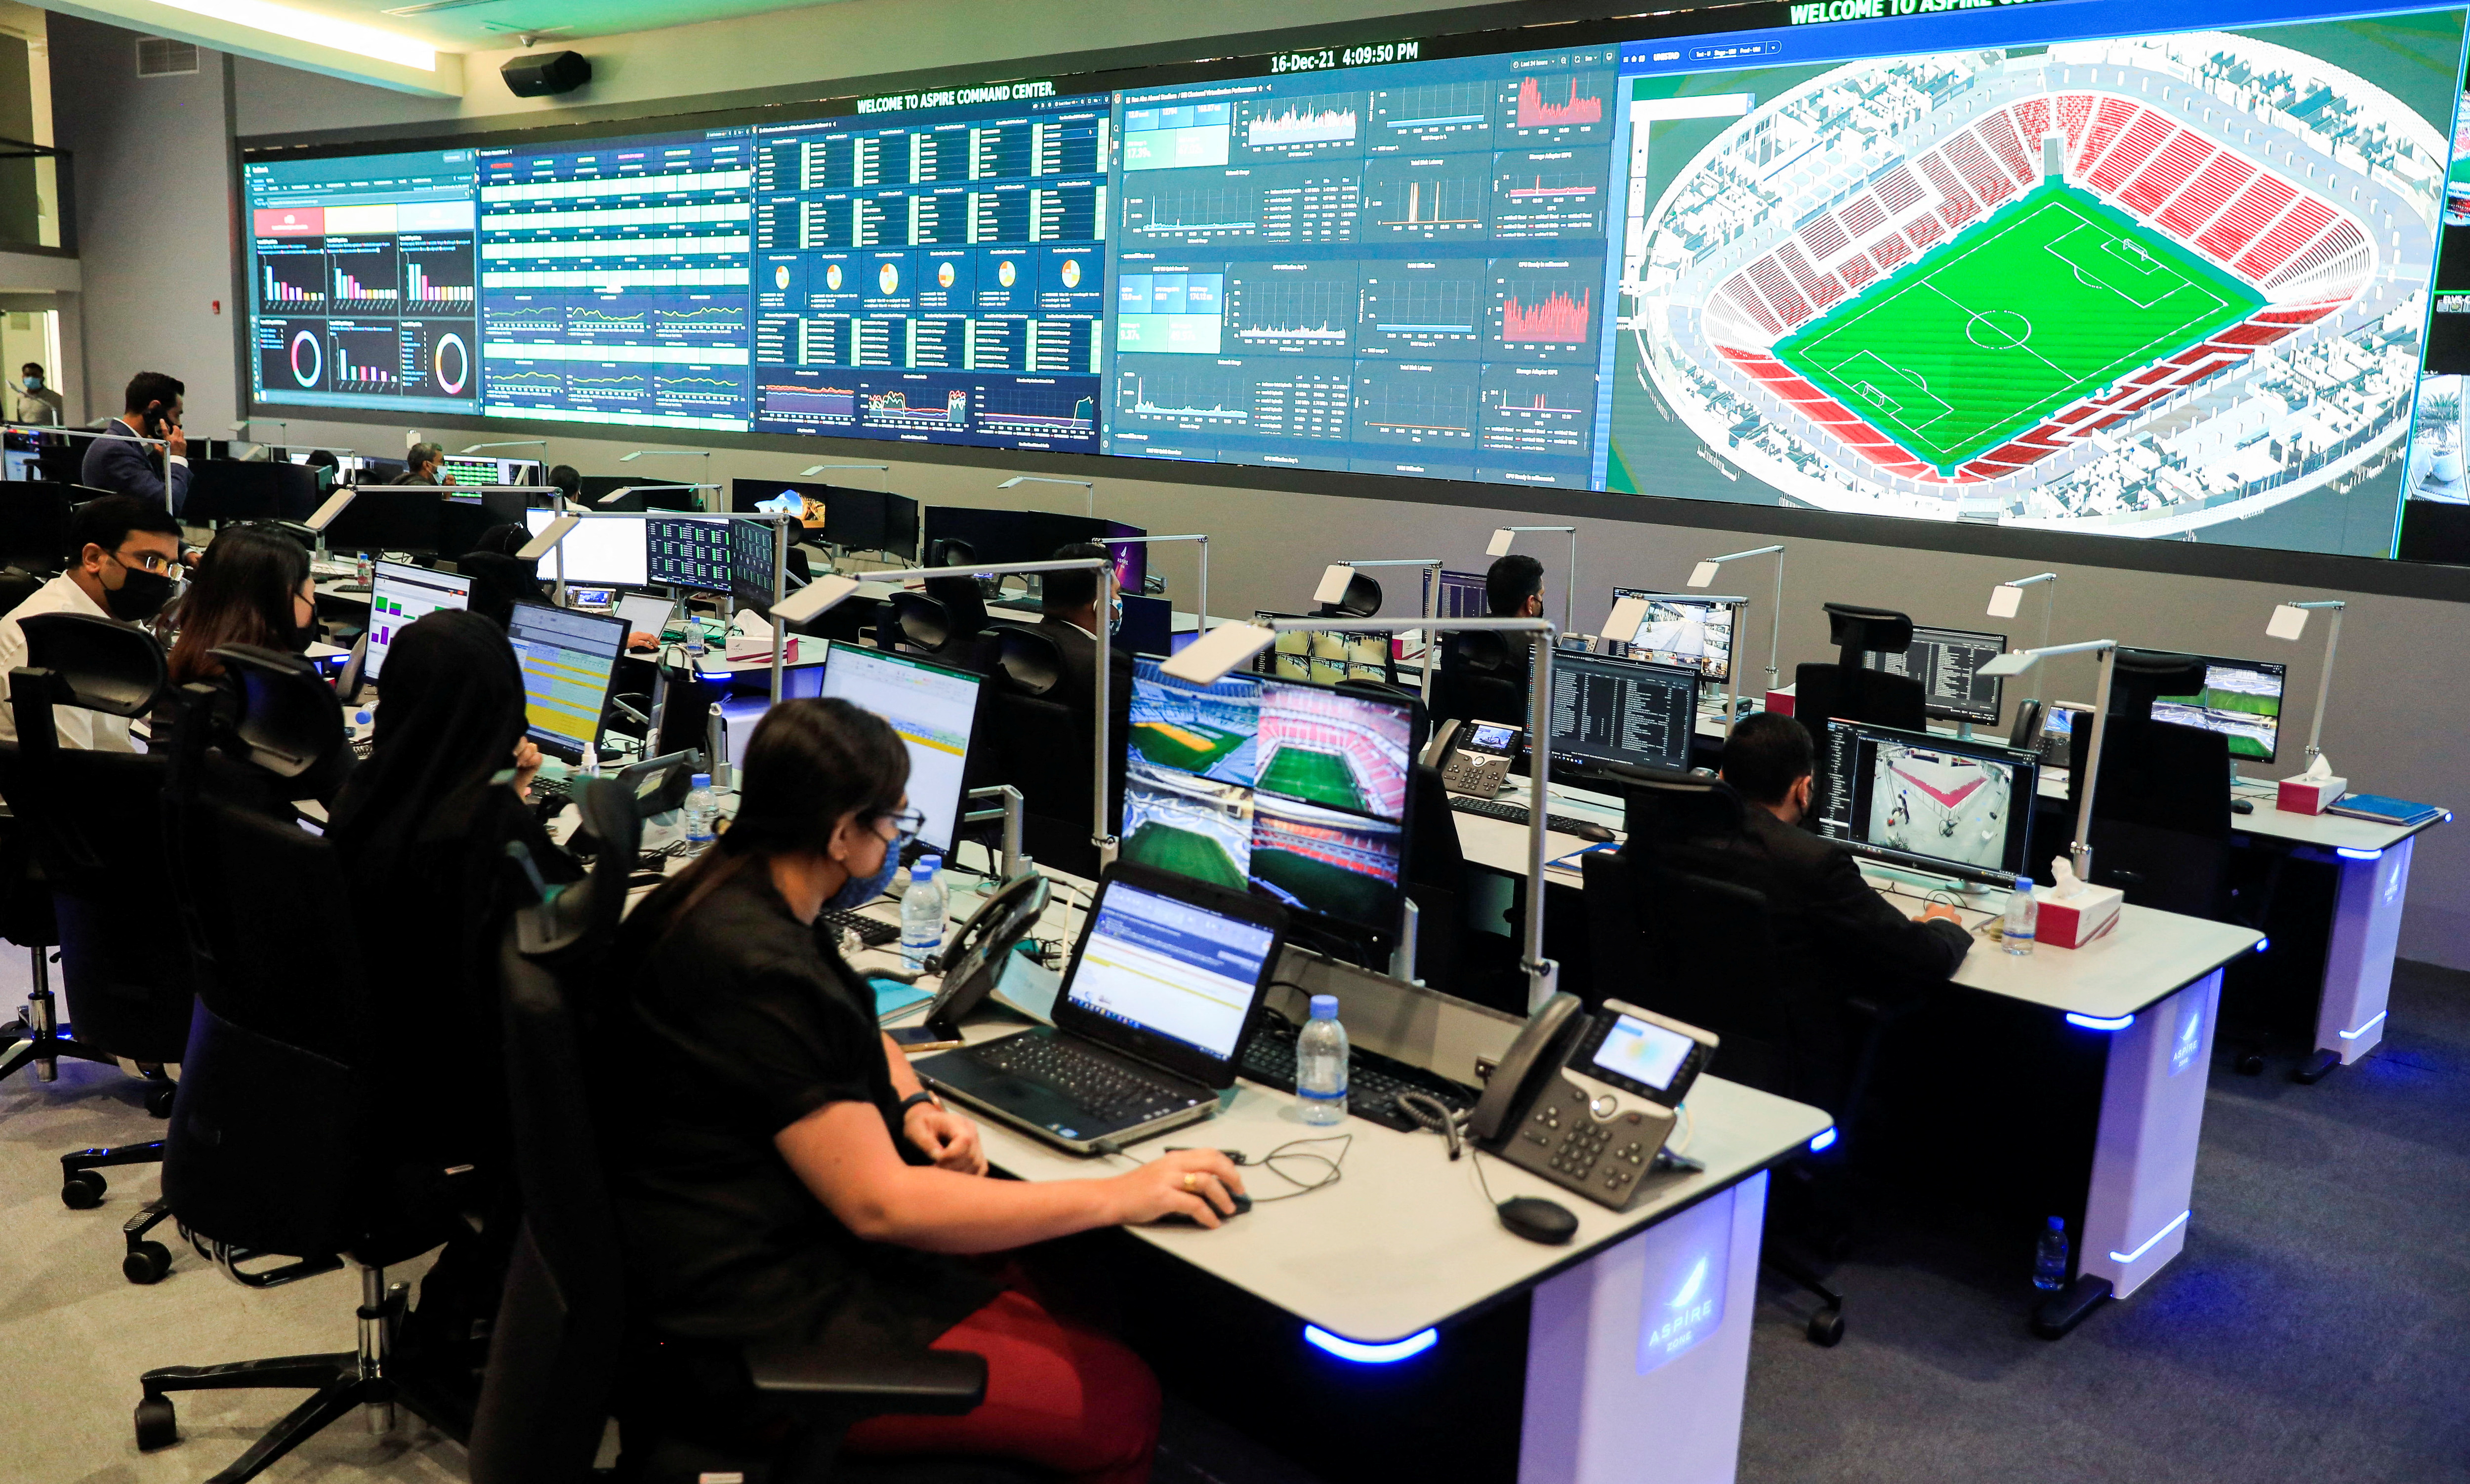 Technology takes center stage at the 2022 FIFA World Cup in Qatar -  PreScouter - Custom Intelligence from a Global Network of Experts